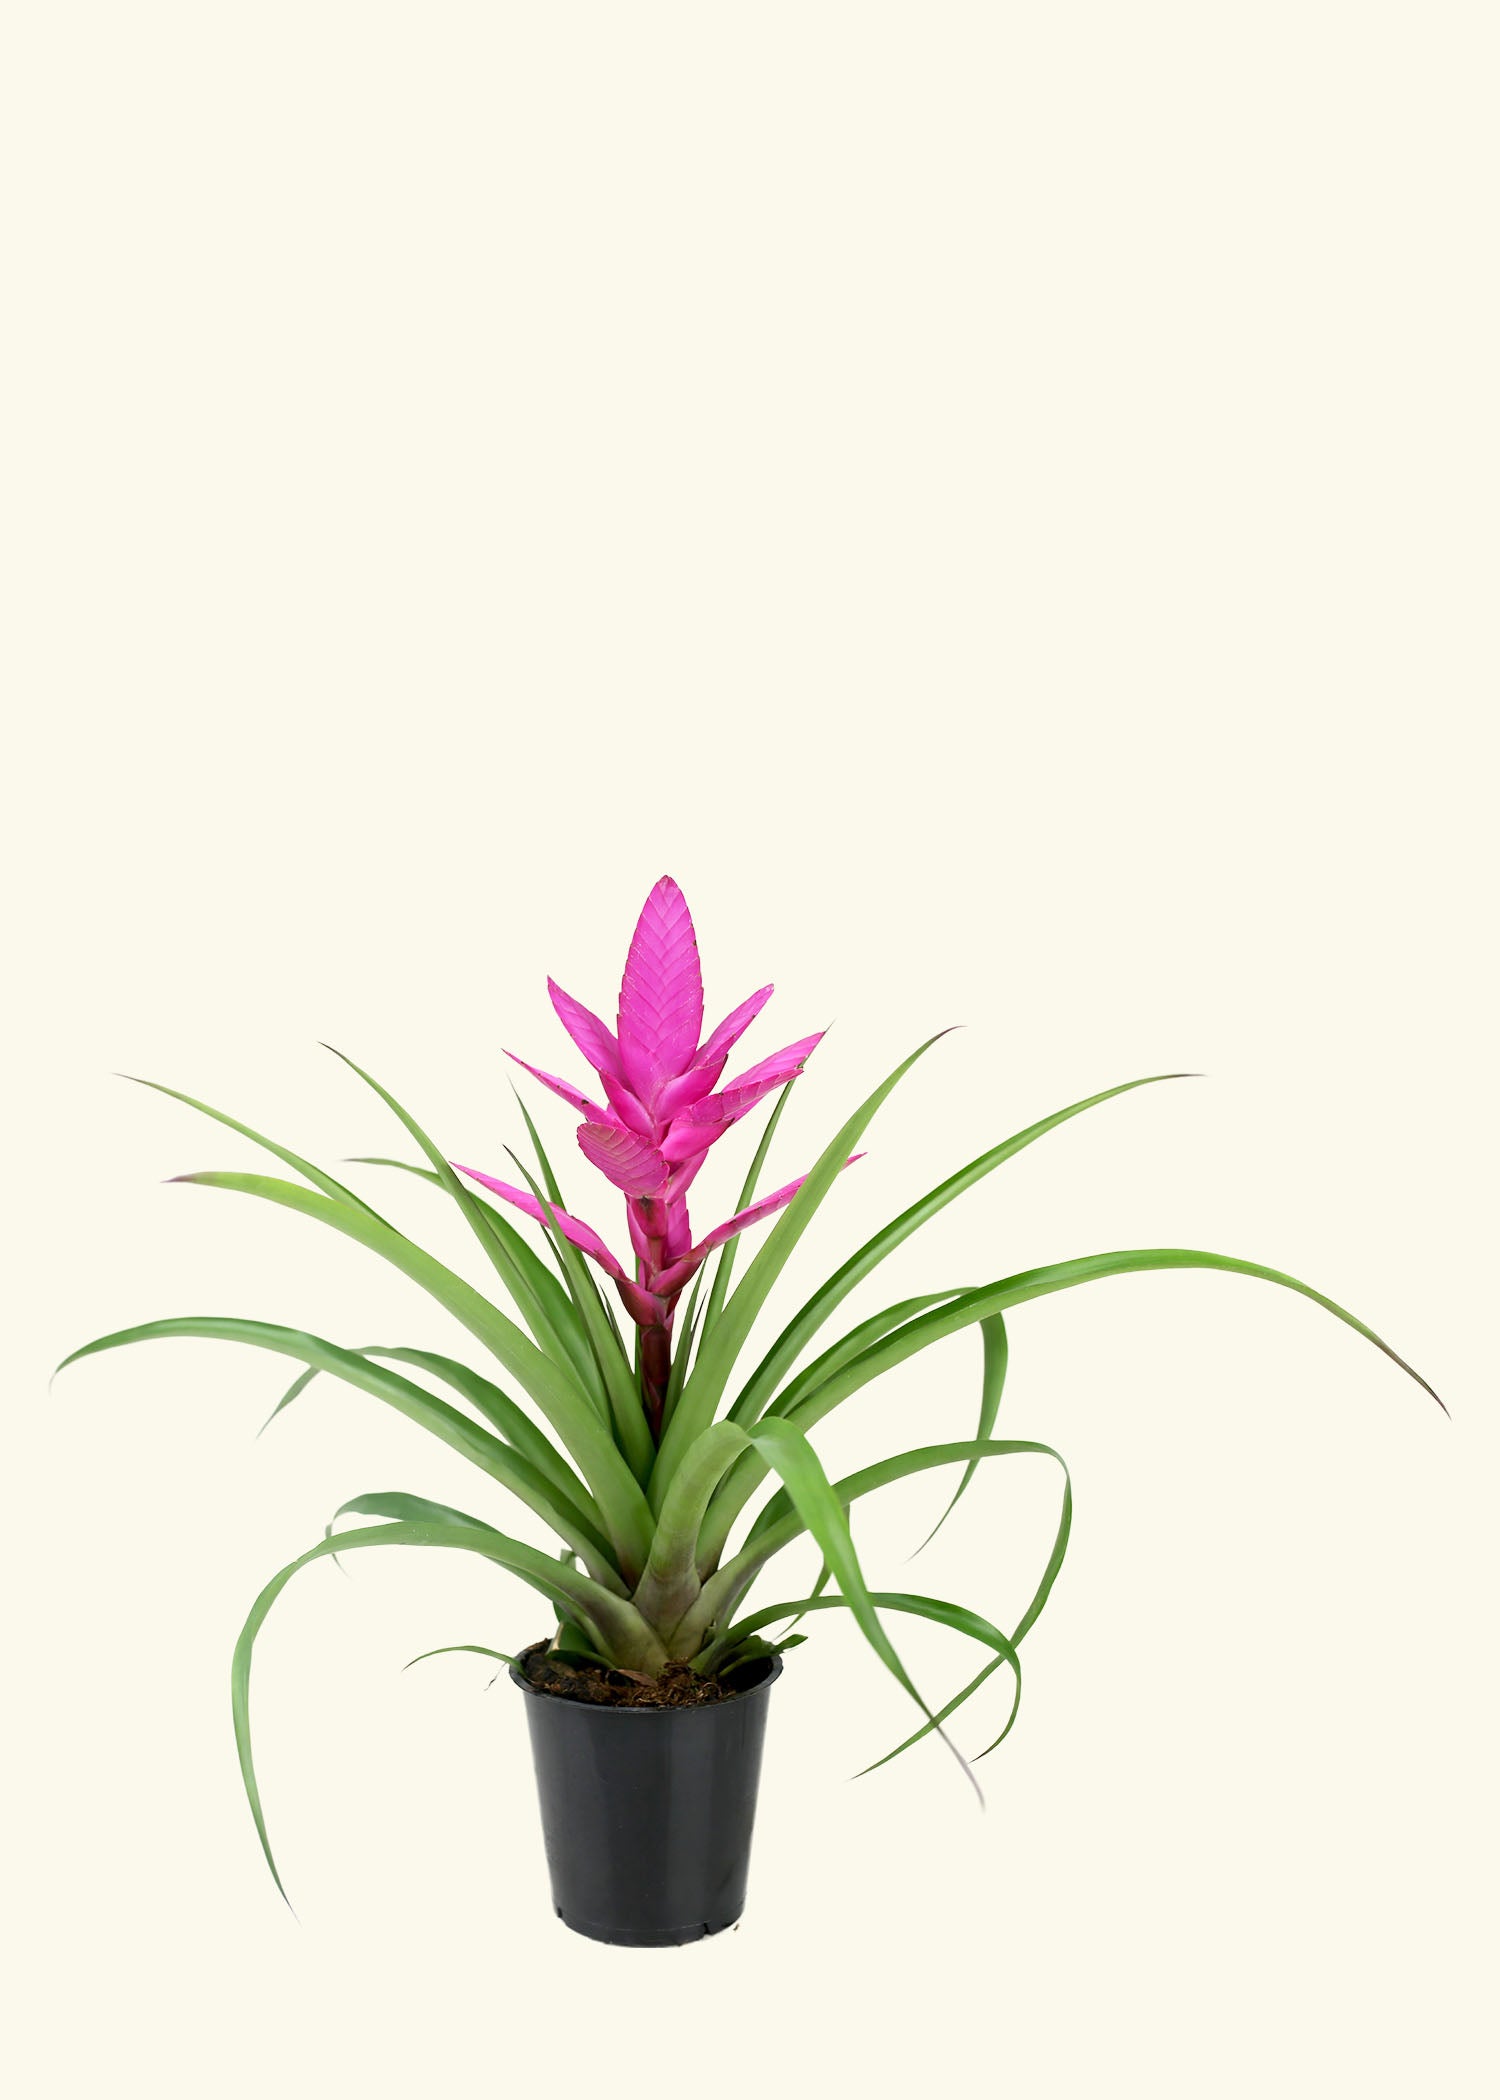 Small Pink Bromeliad in a grow pot.